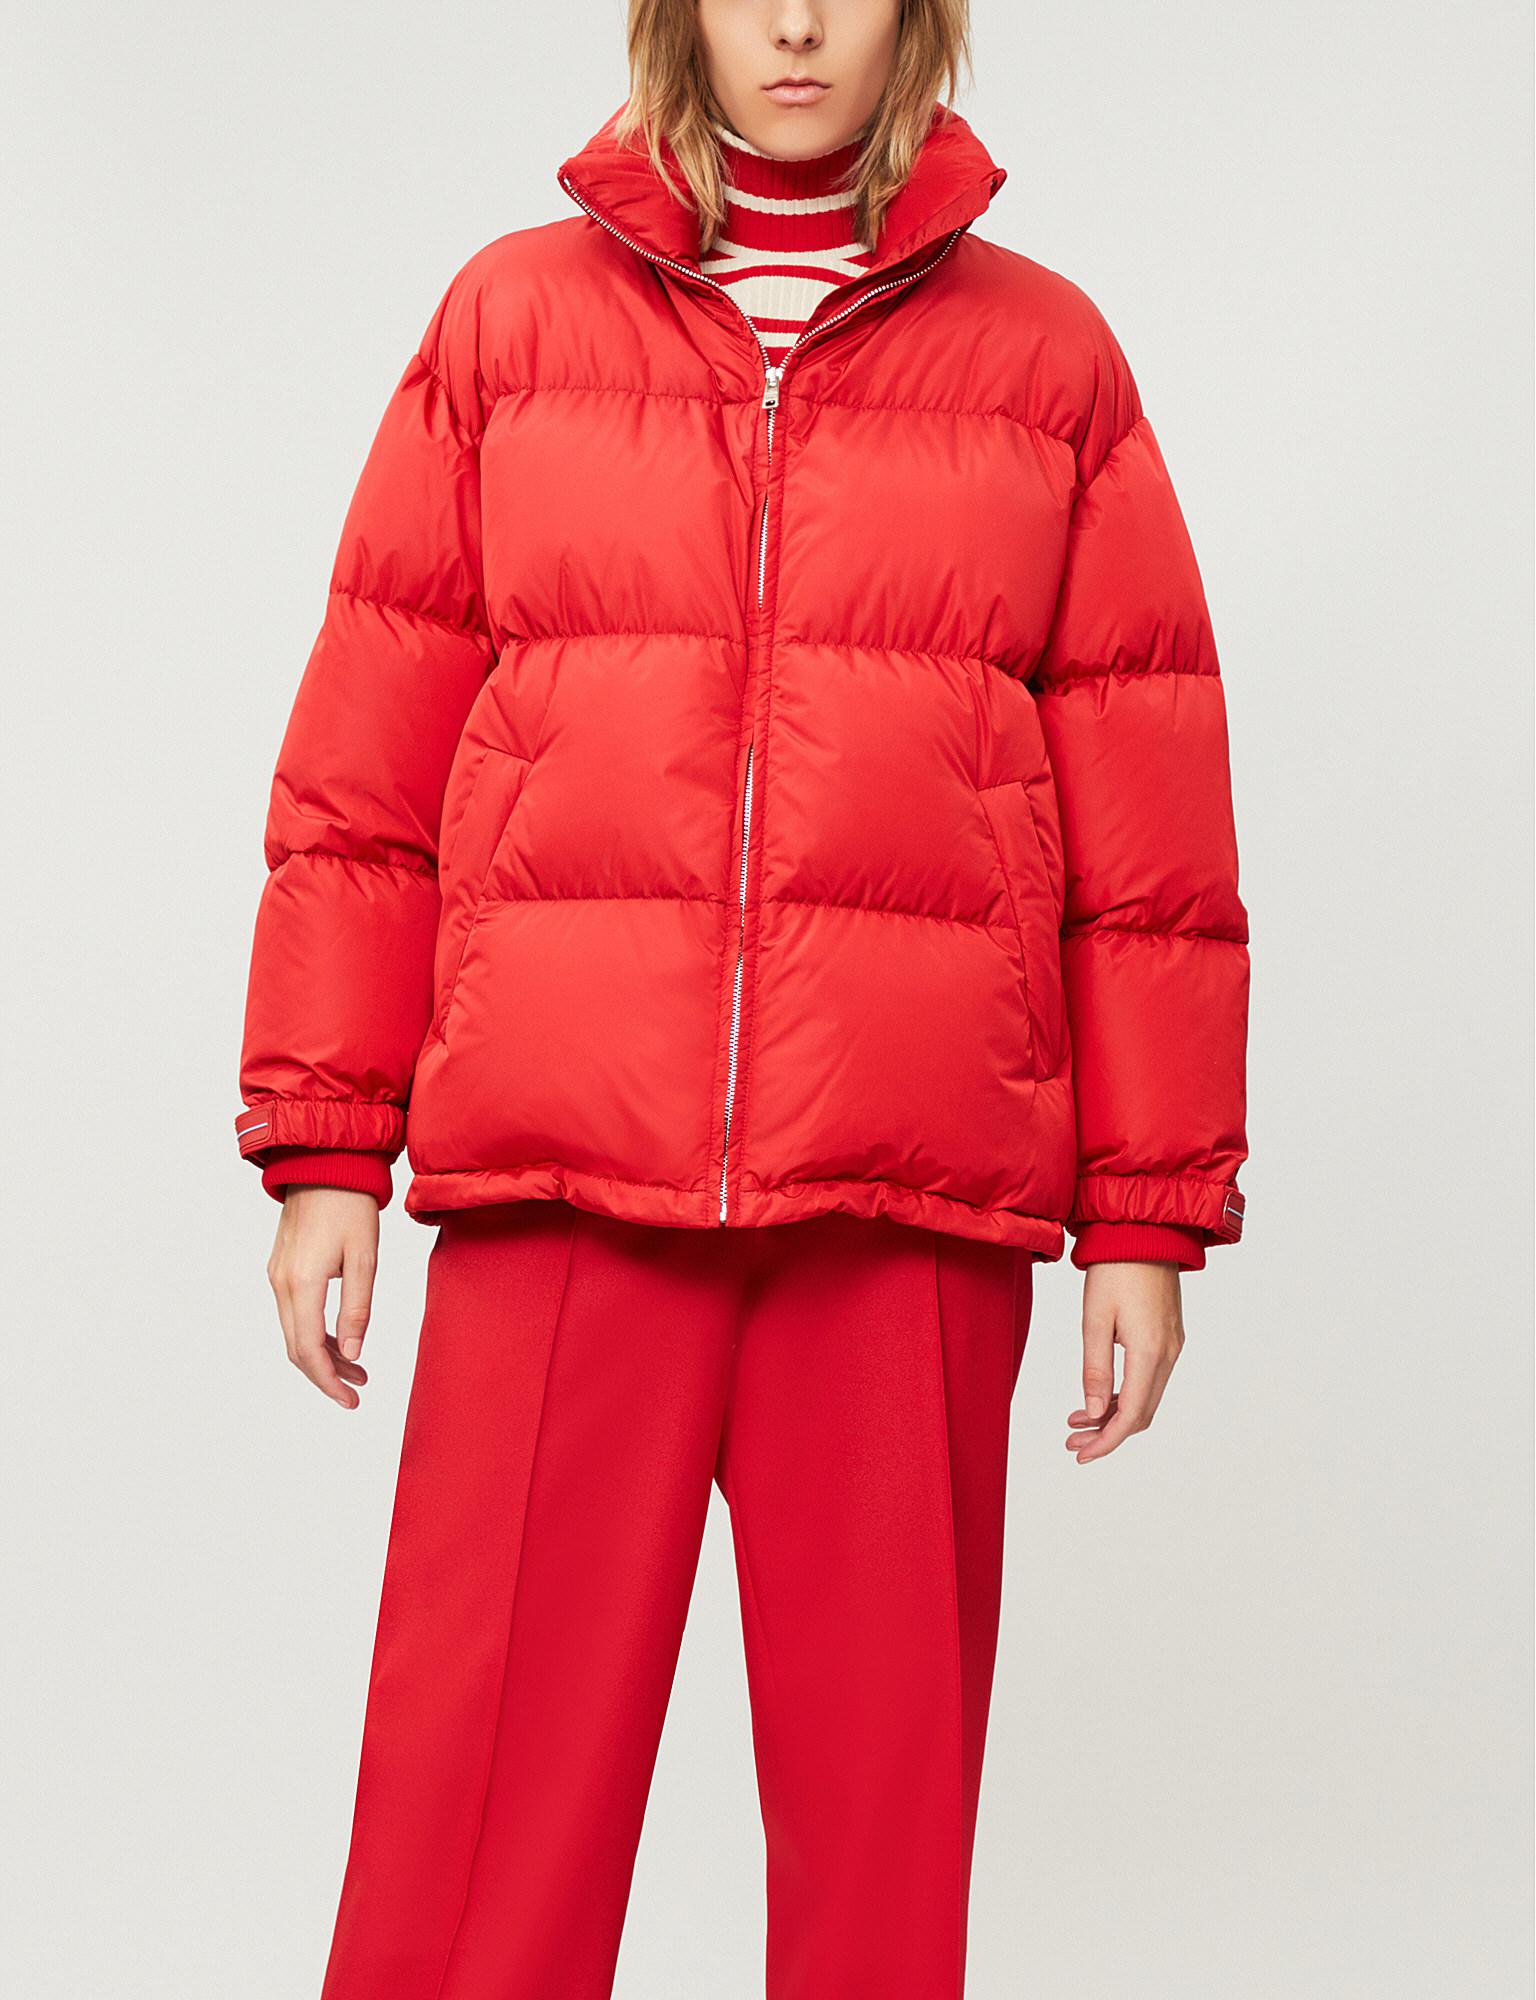 Prada Oversized Shell-down Puffer Jacket in Red - Lyst